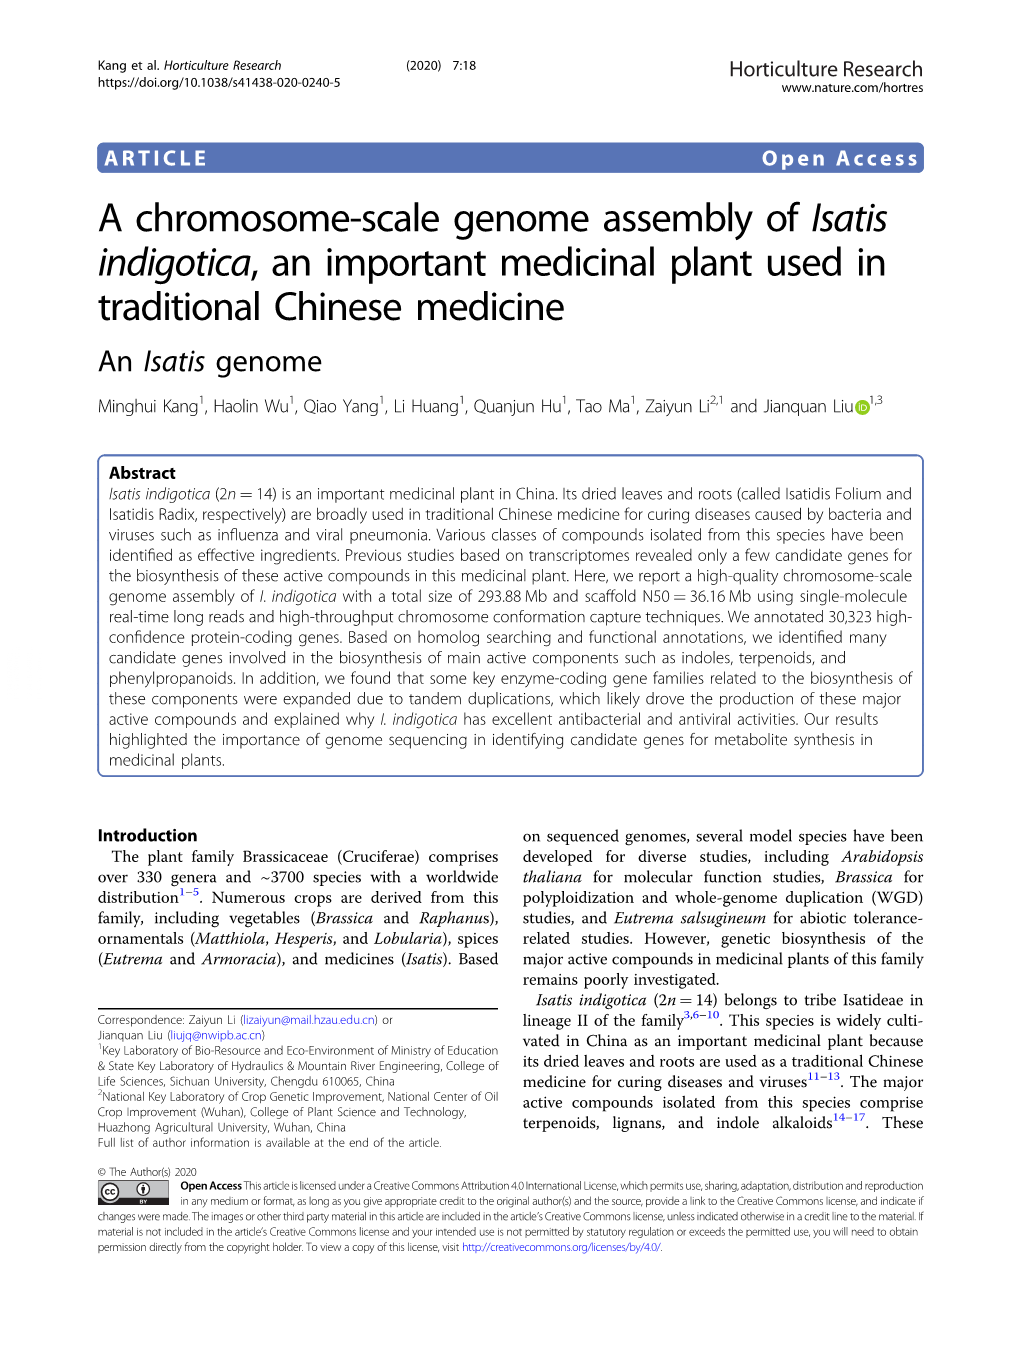 A Chromosome-Scale Genome Assembly of Isatis Indigotica, an Important Medicinal Plant Used in Traditional Chinese Medicine an Isatis Genome